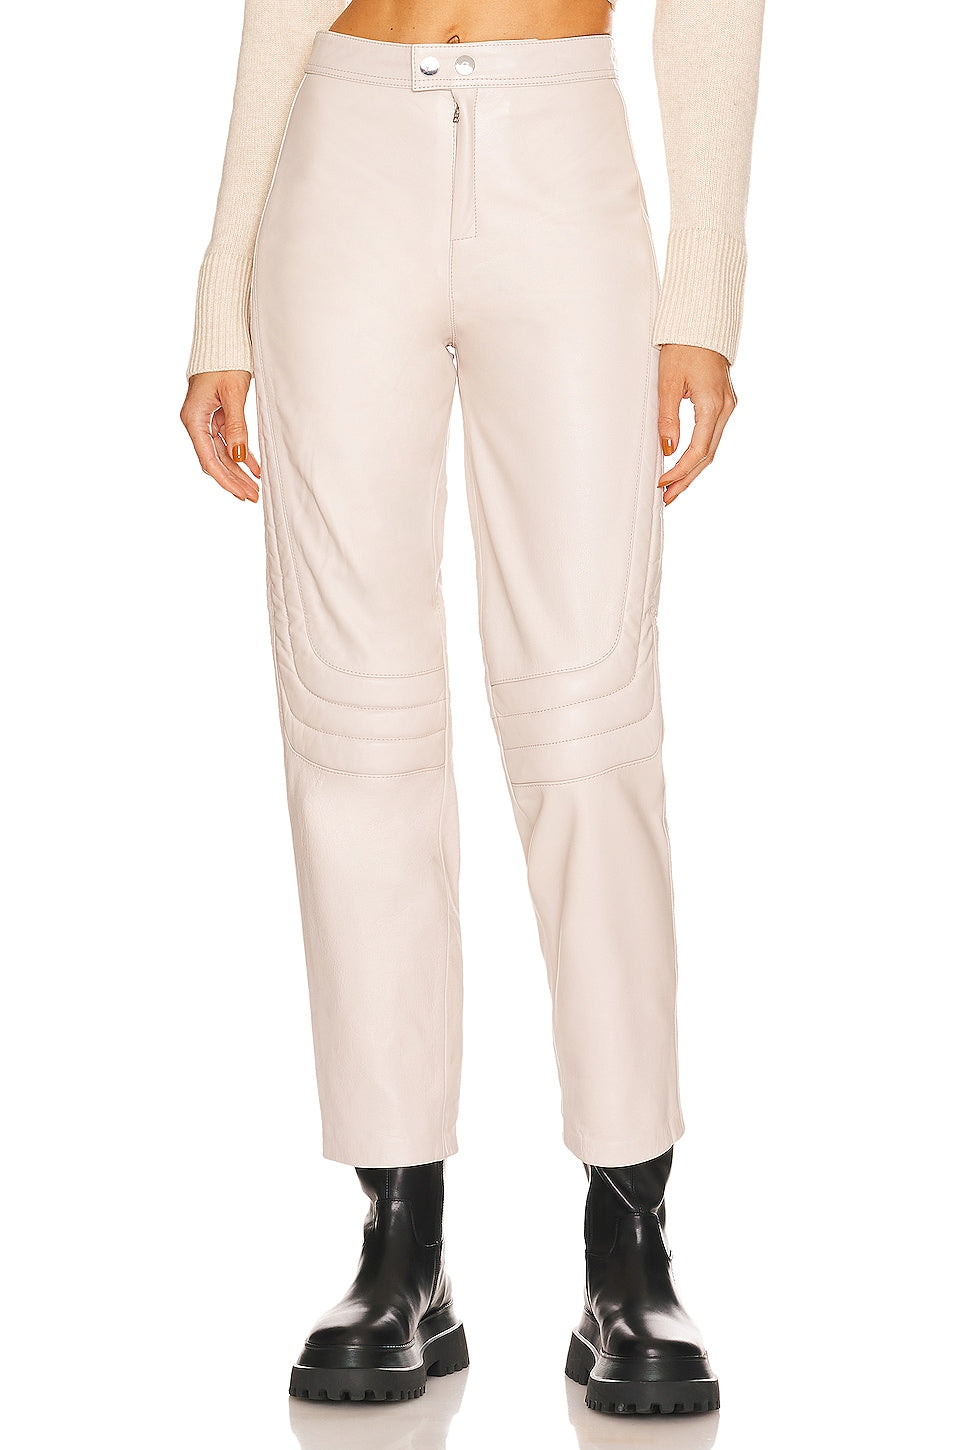 L'Academie Rue Leather Pant in Bone Ivory